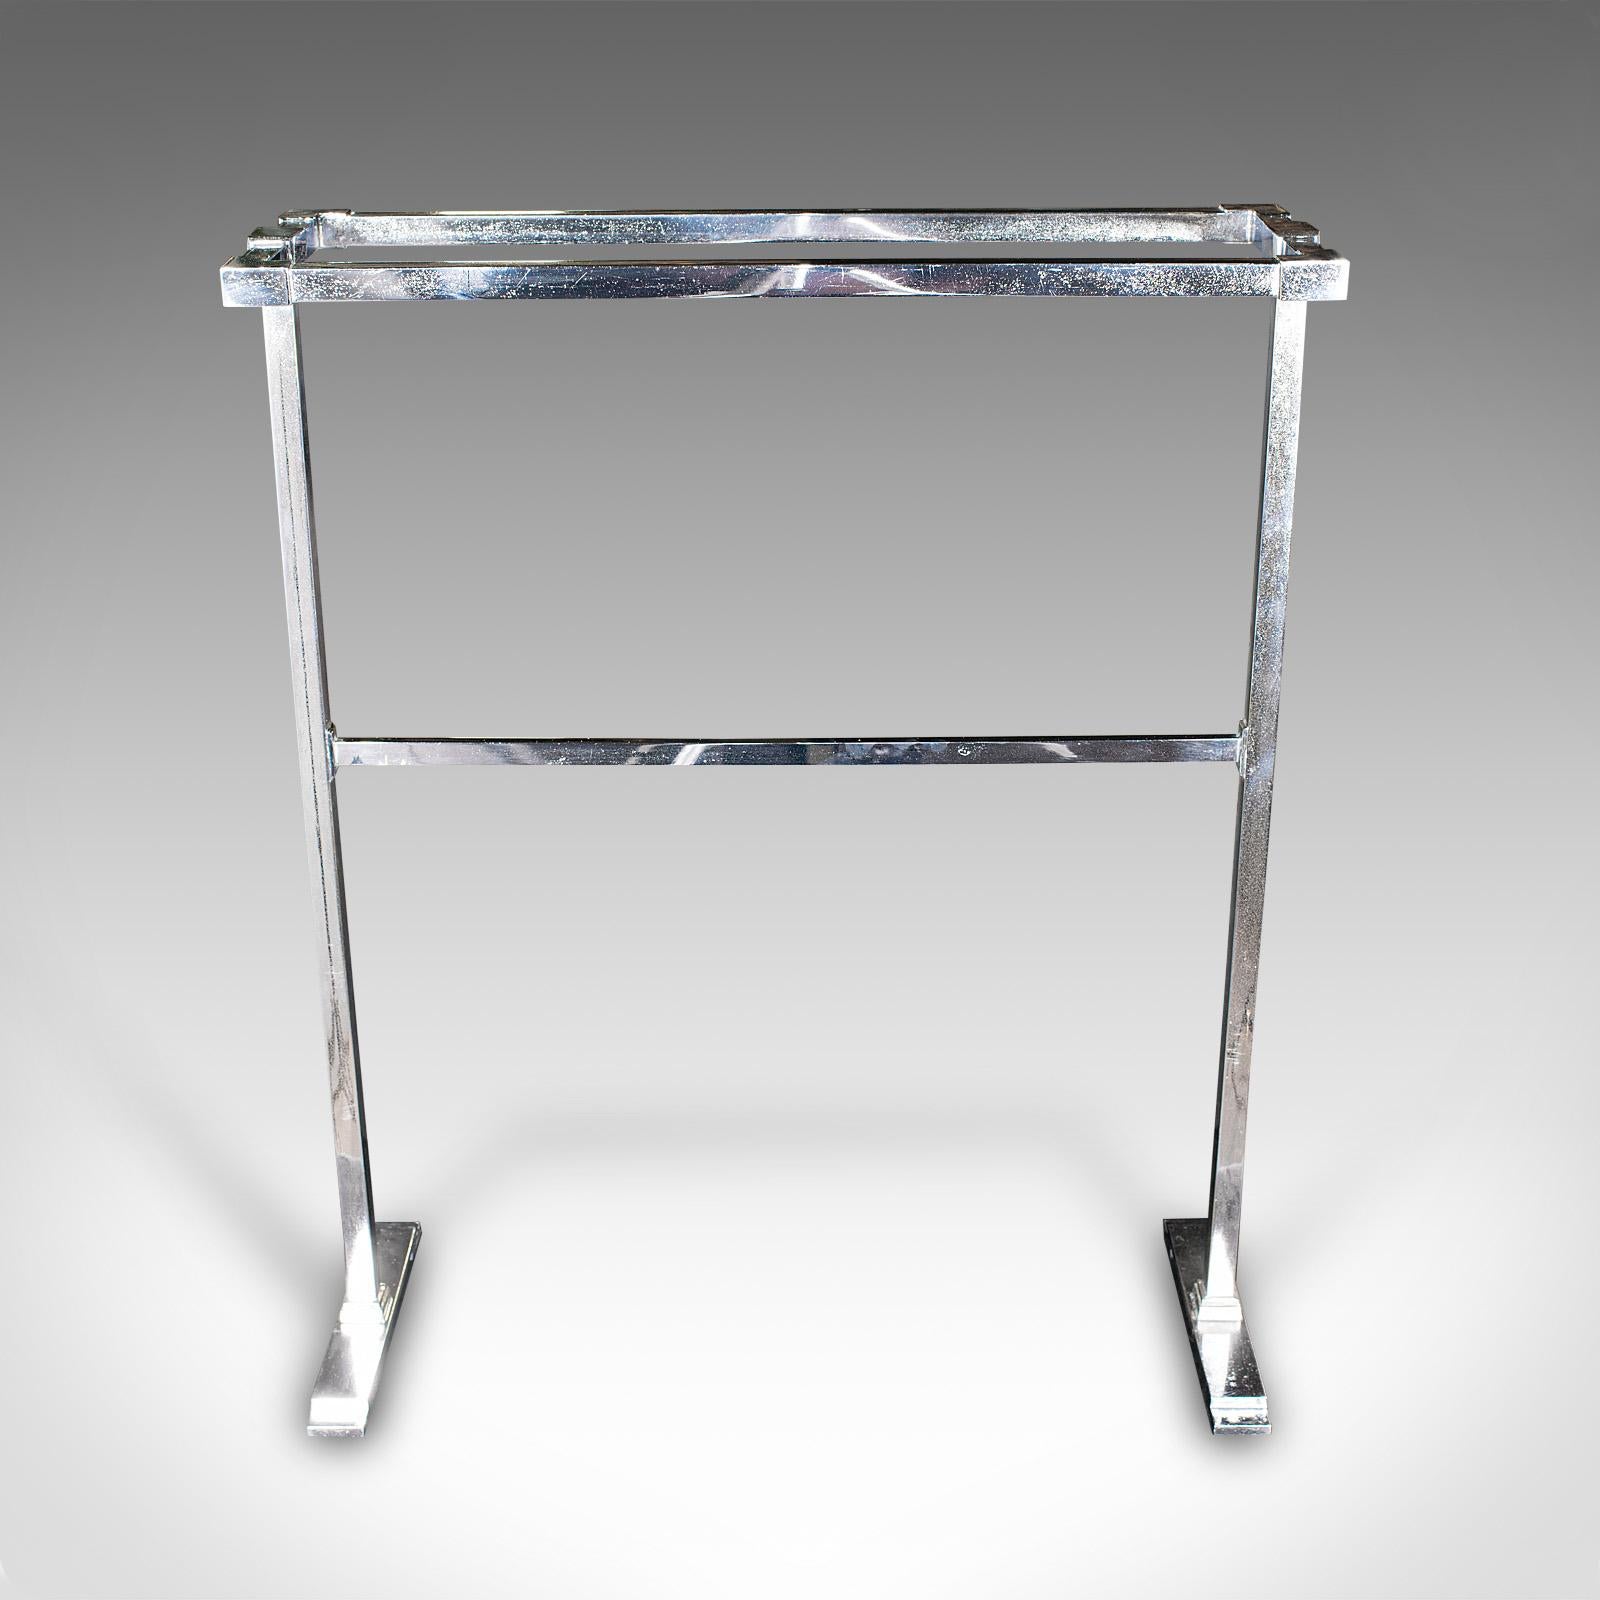 20th Century Vintage Towel Rail, French, Chromed Brass, Valet, Drying Stand, Art Deco, C.1930 For Sale